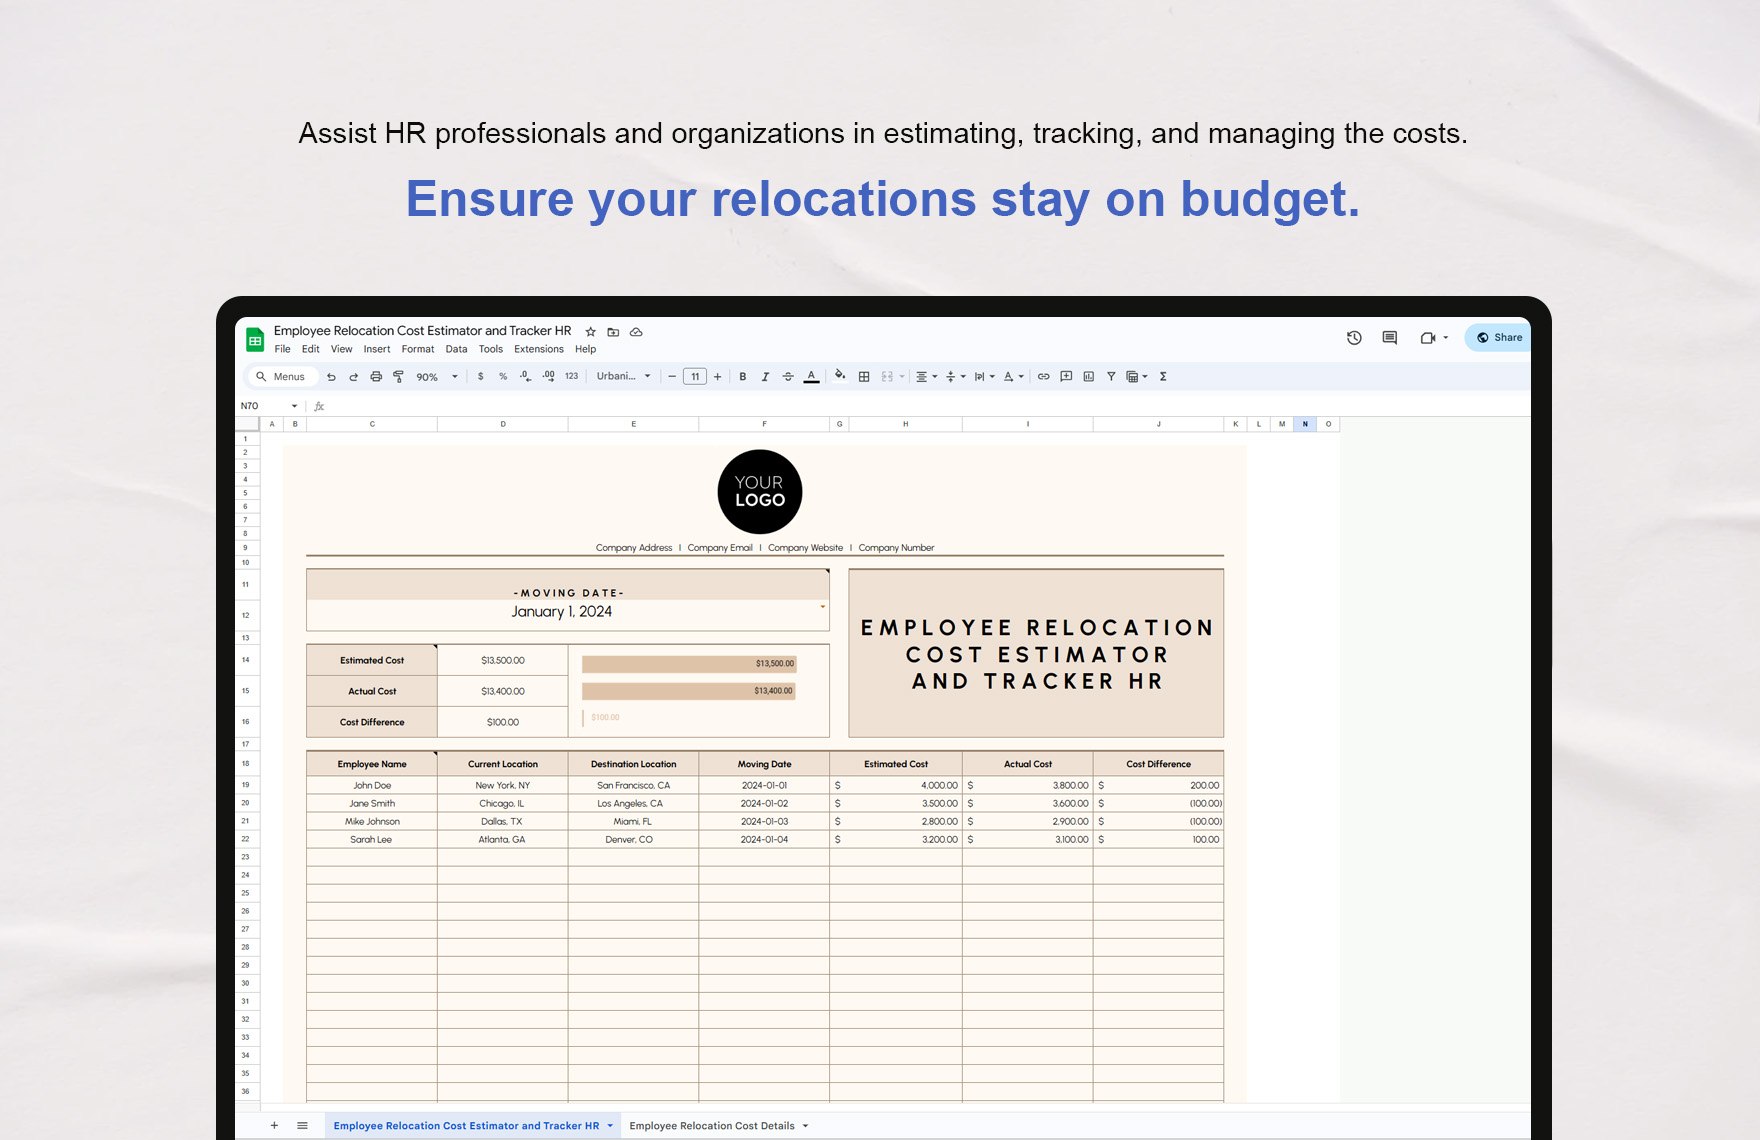 Employee Relocation Cost Estimator and Tracker HR Template